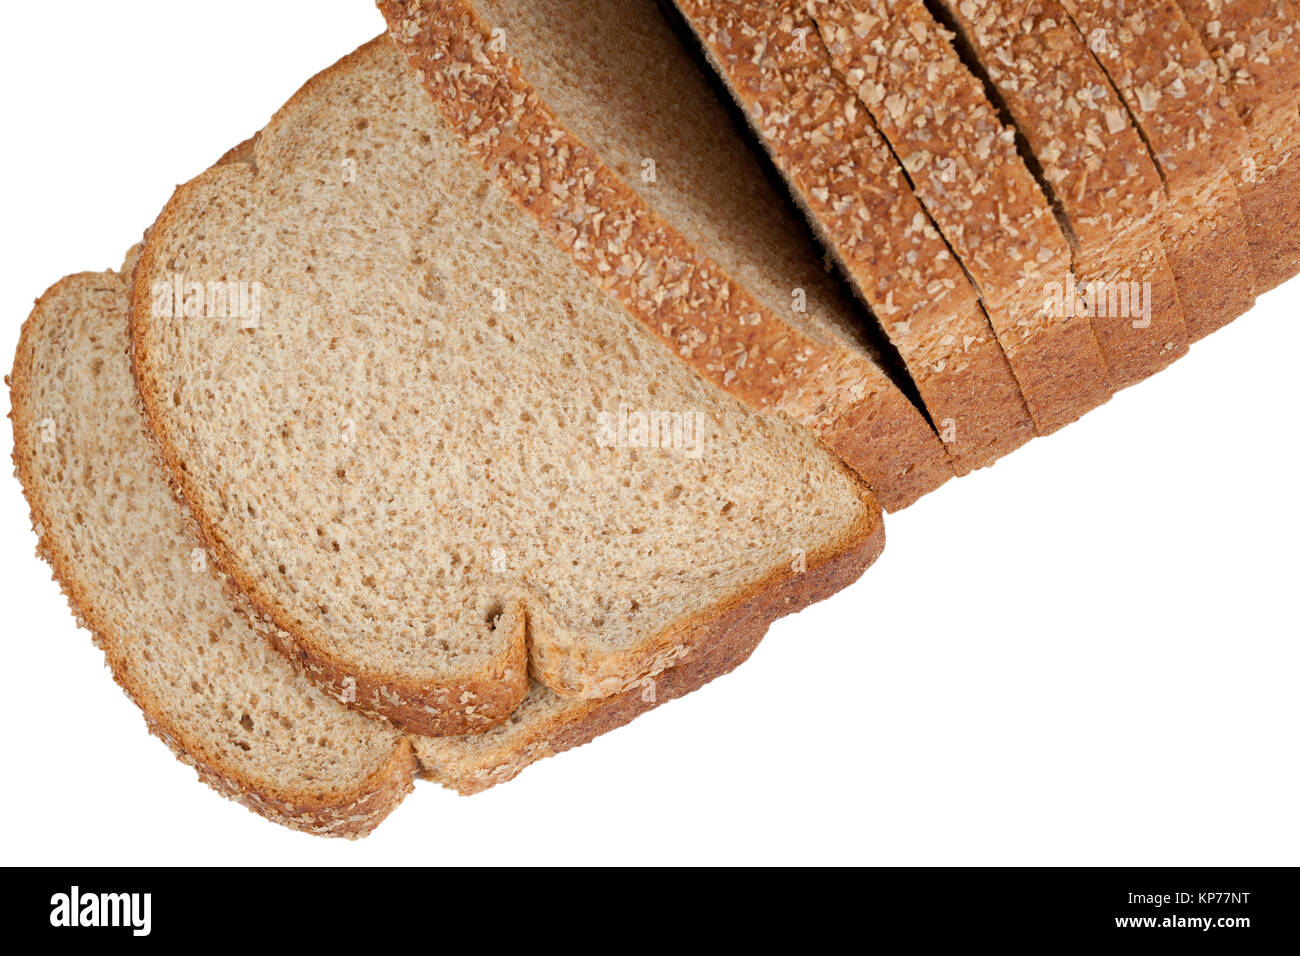 close up image of loaf of bread Stock Photo